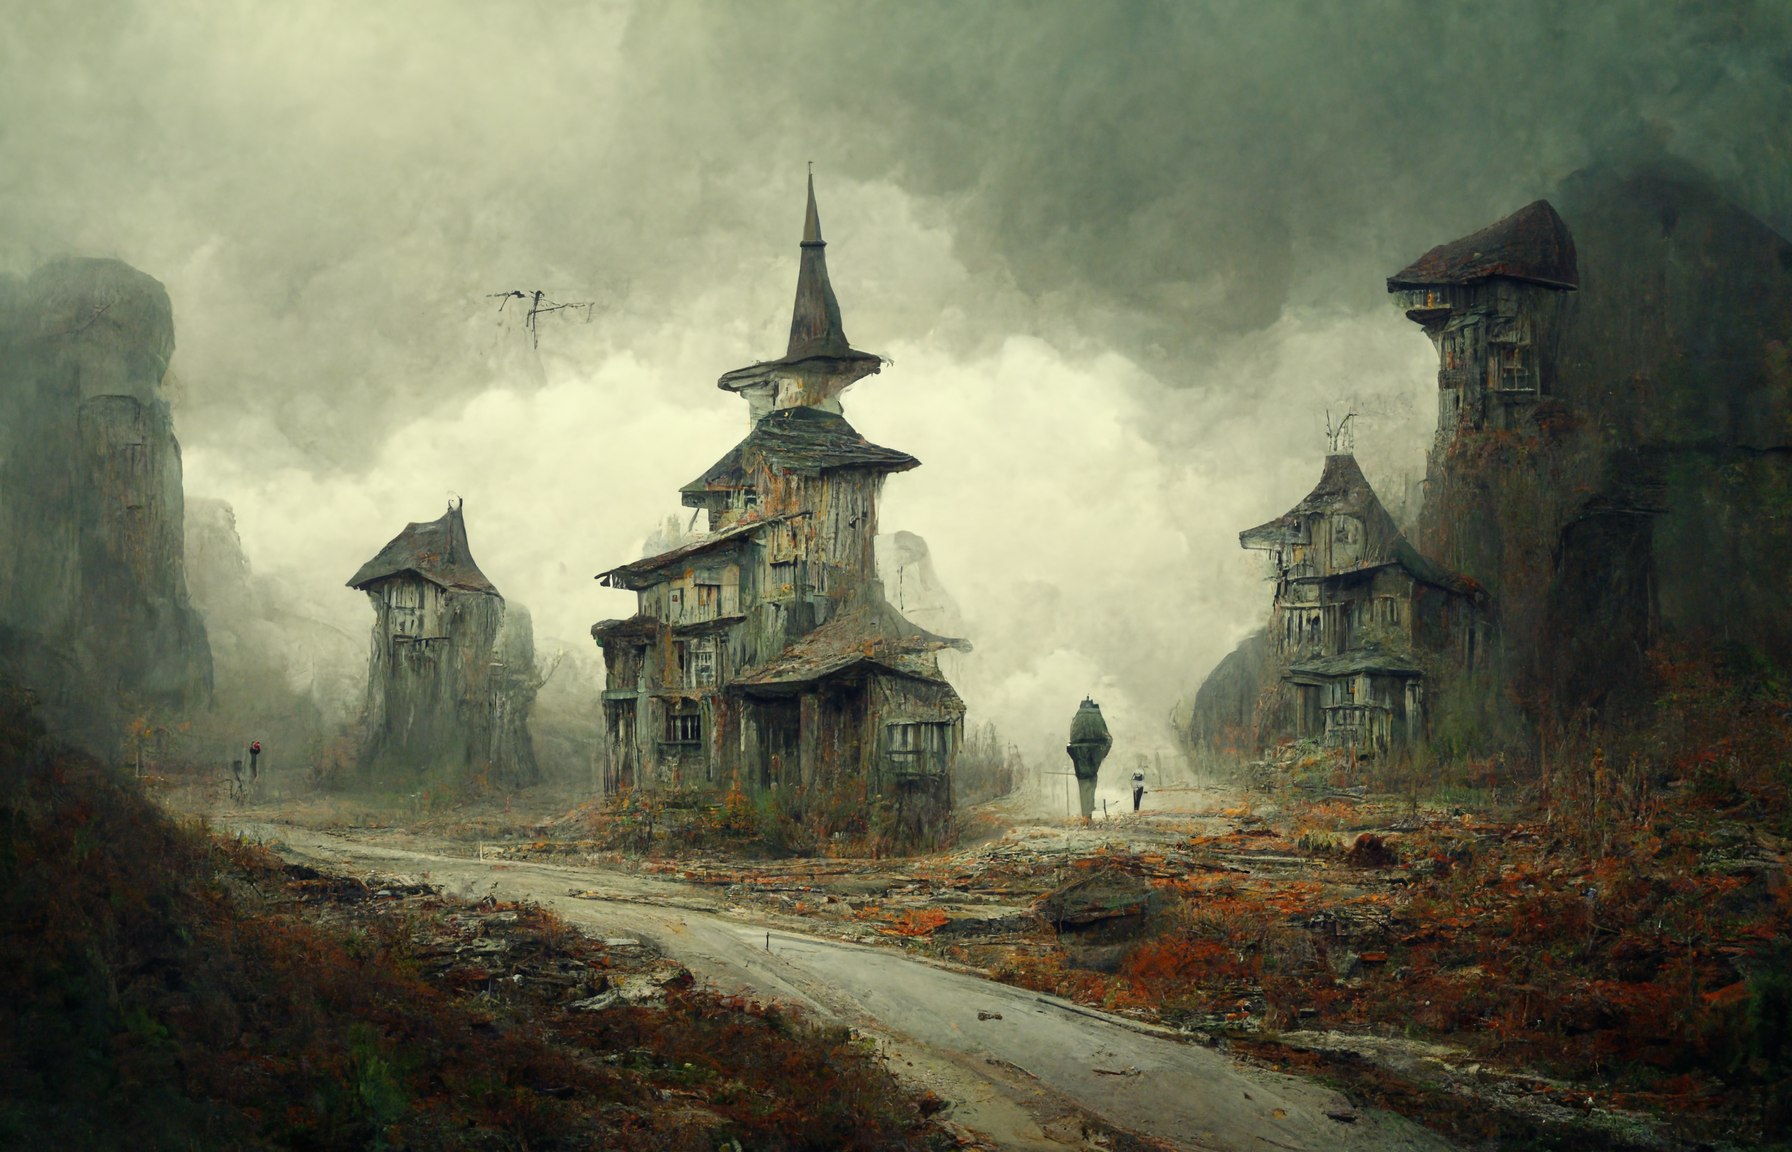 ghost town in a fantasy world